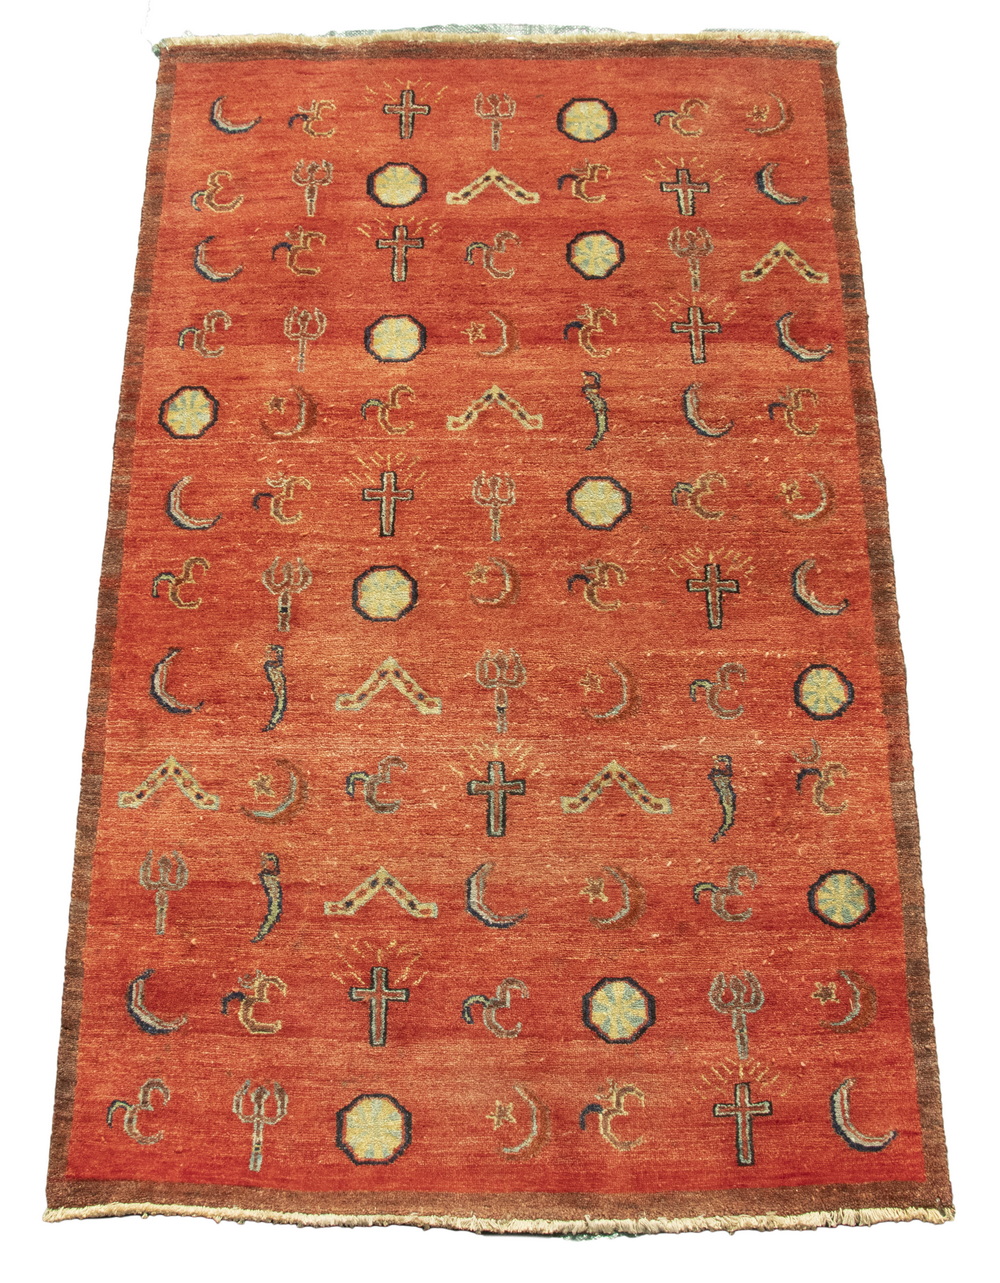 INDIA MADE PEACE RUG A rust red 2b3a27